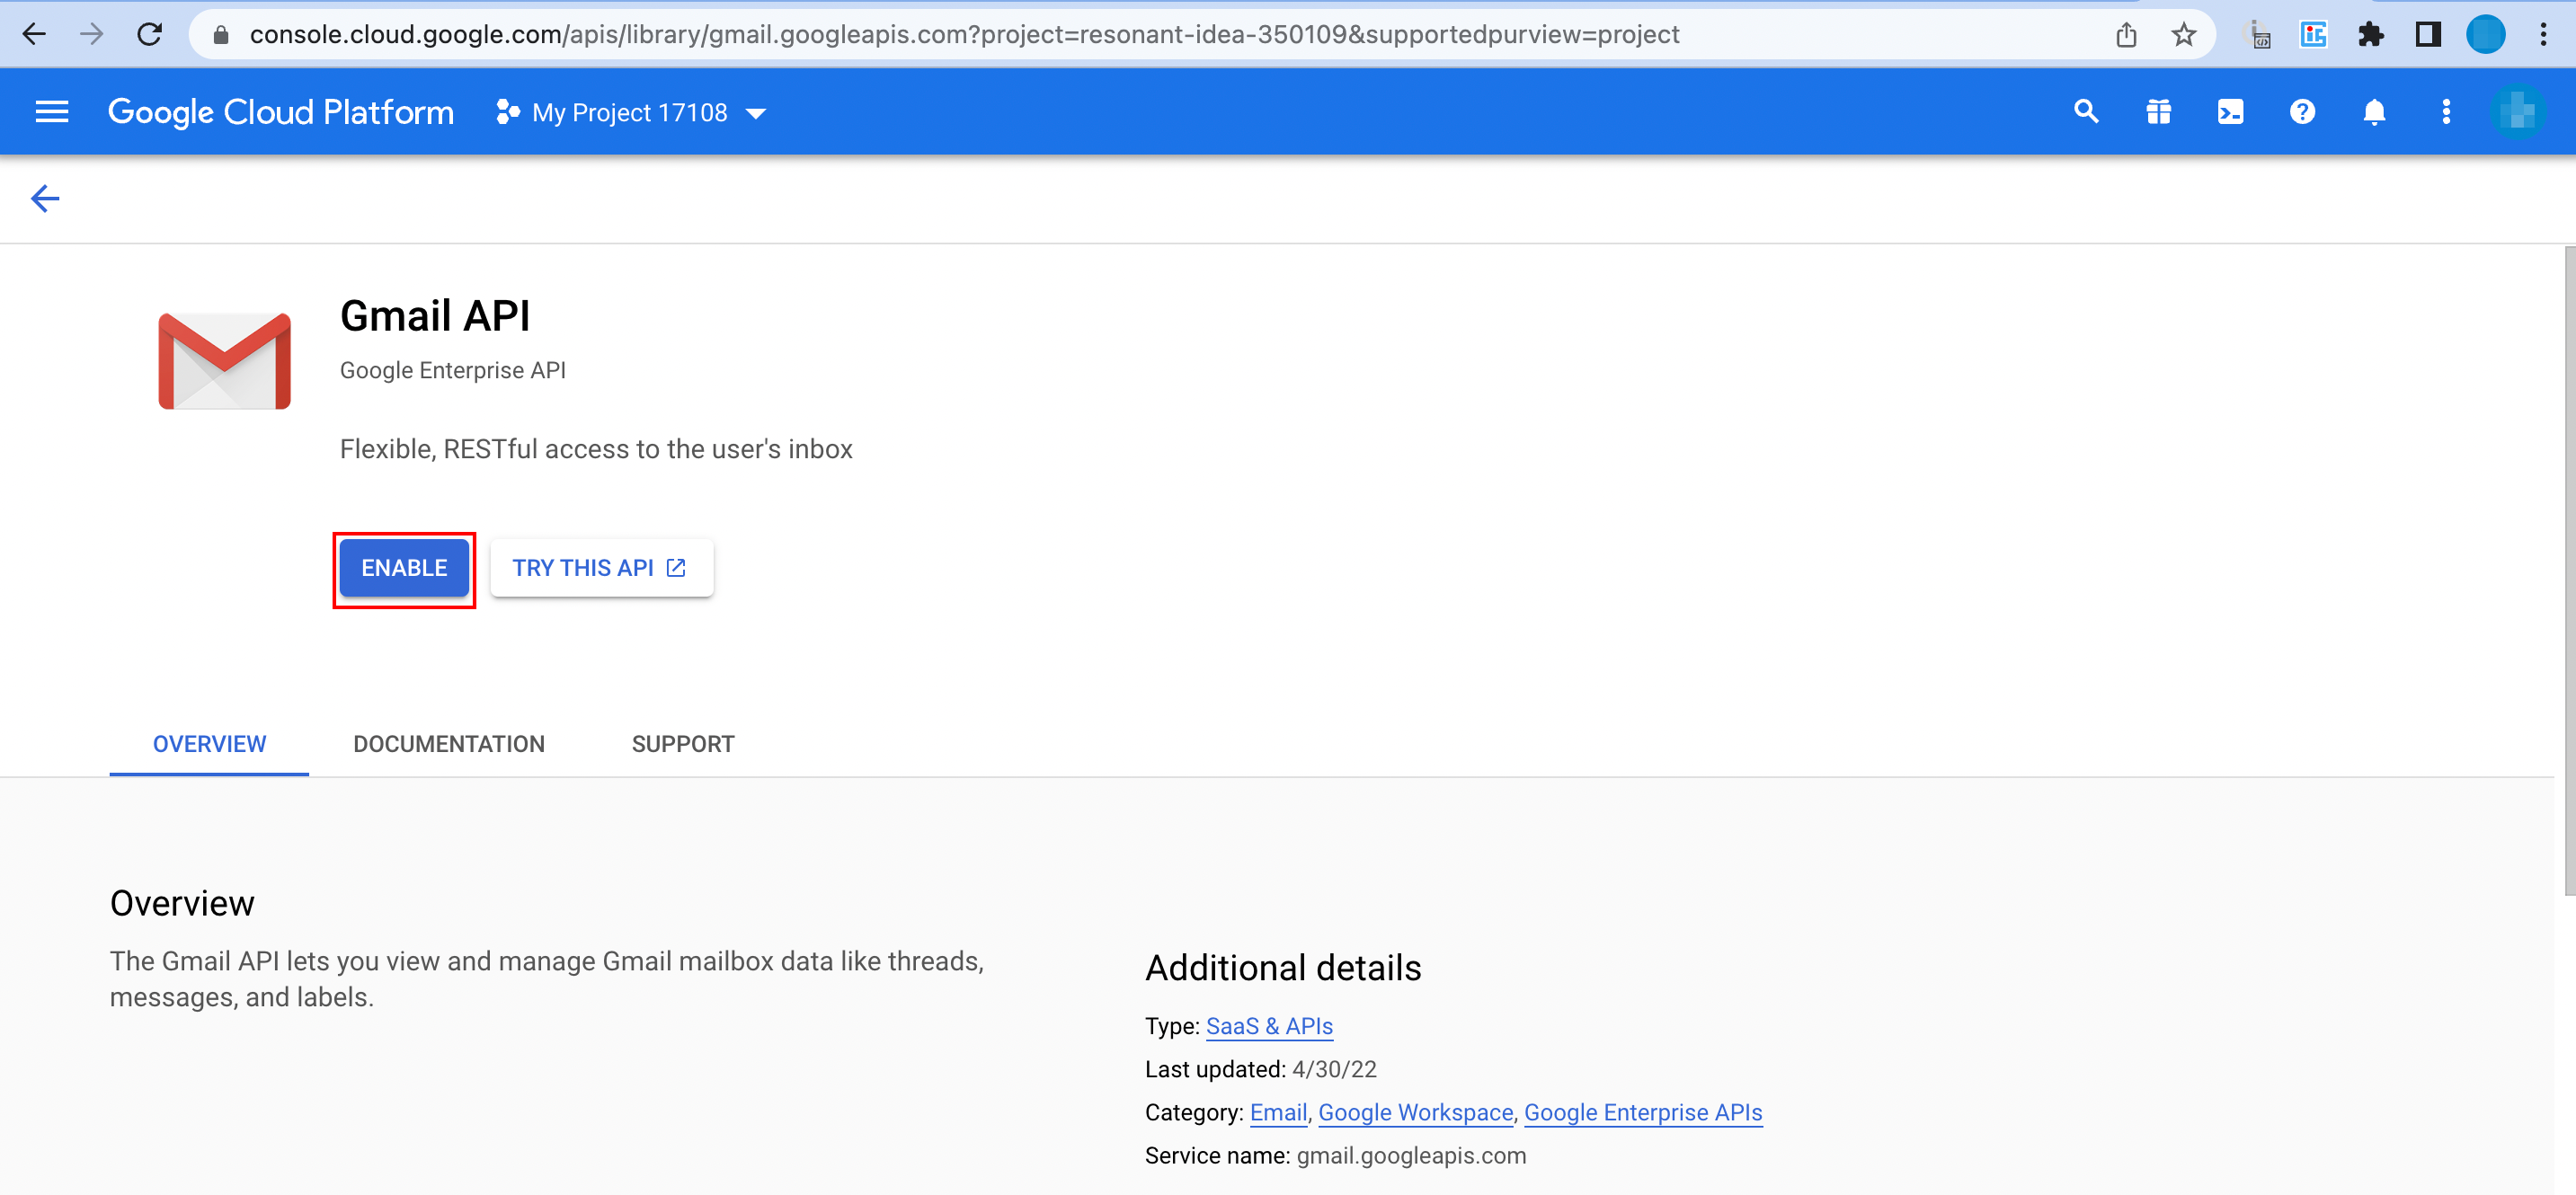 Connecting to Google services using custom OAuth client